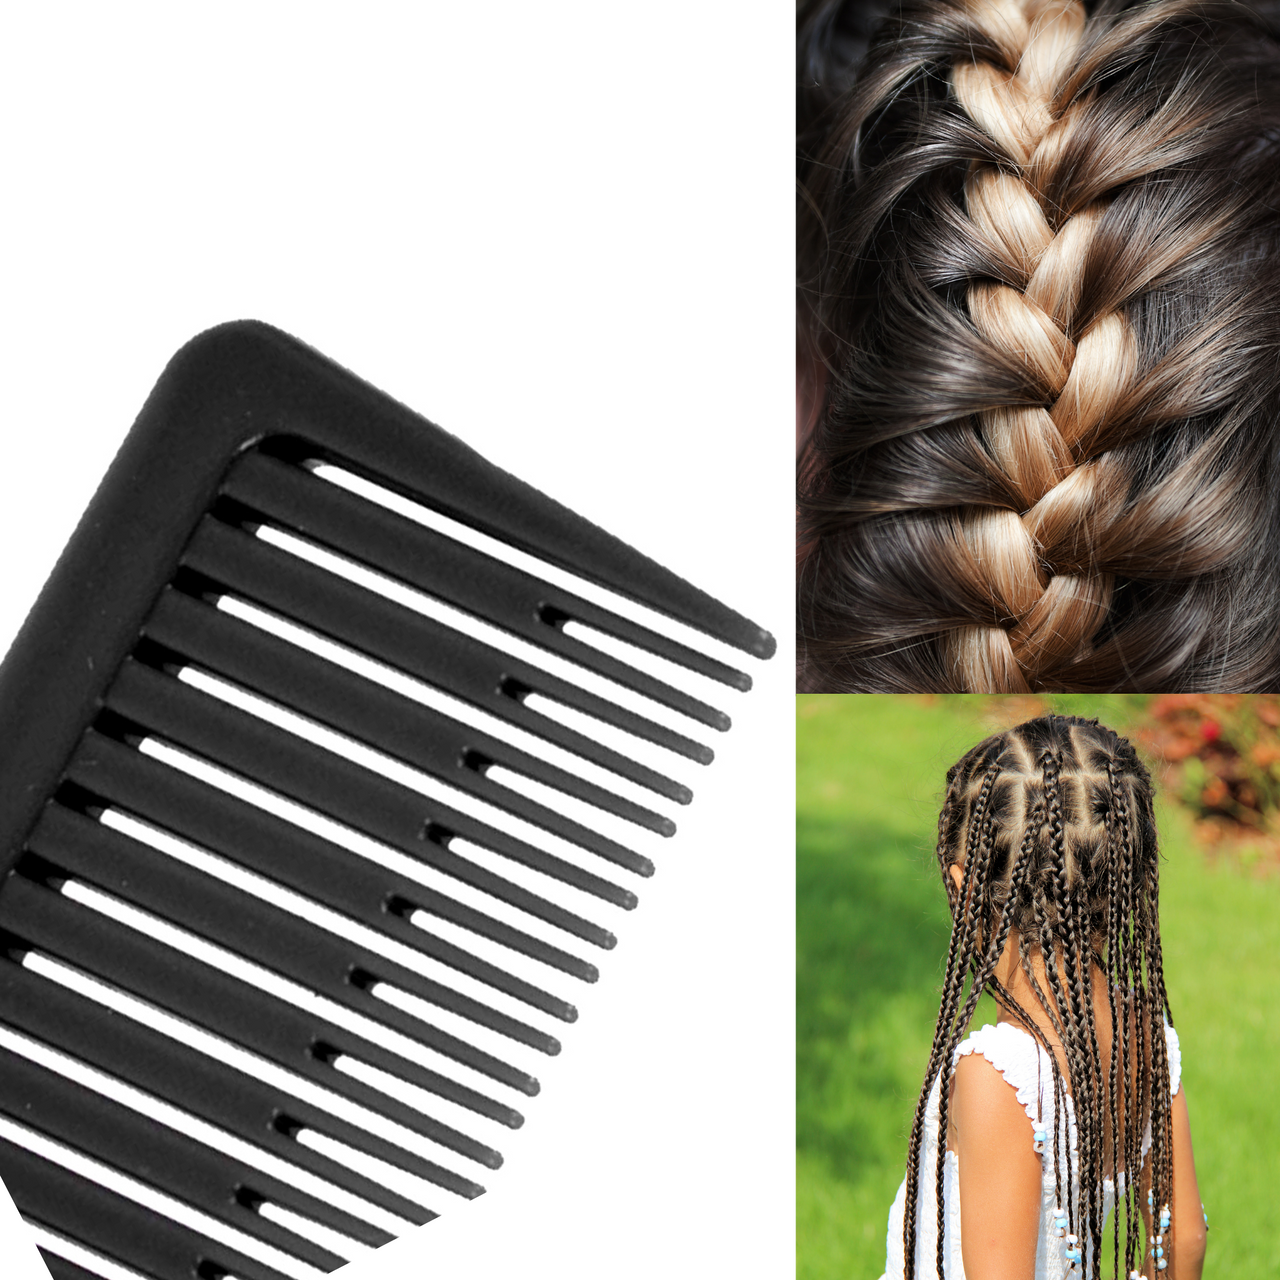 2 PC Pink Braiding Weaving Rat Tail Styling Comb - Blond Forte